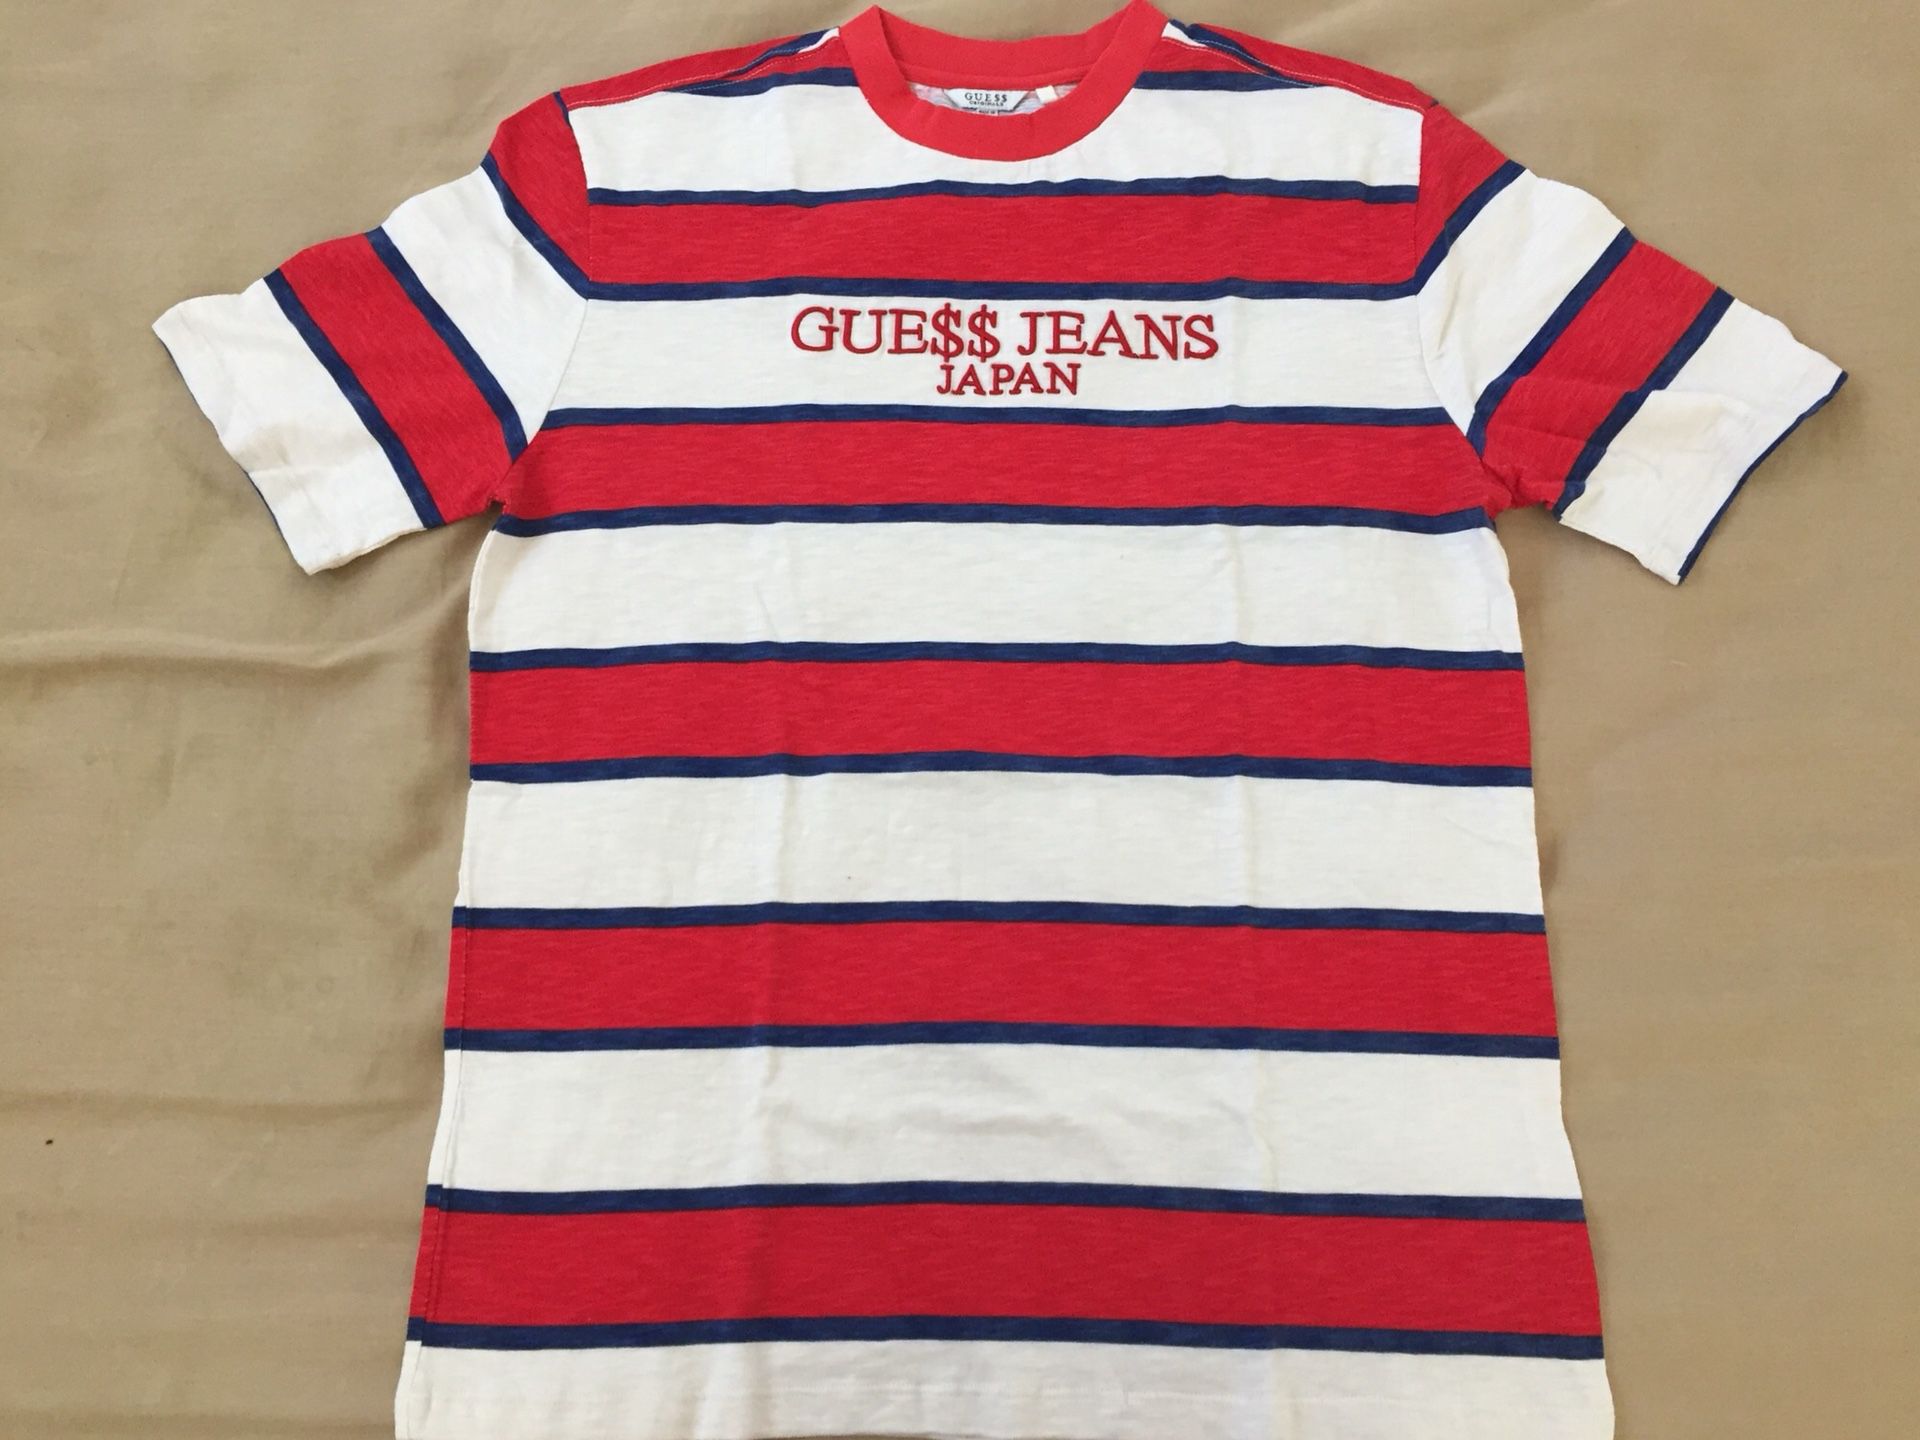 M GUE$$ / GUESS JEANS x A$AP / ASAP ROCKY Japan Exclusive Supreme Short Sleeve Shirt Red Blue for Sale in CA - OfferUp